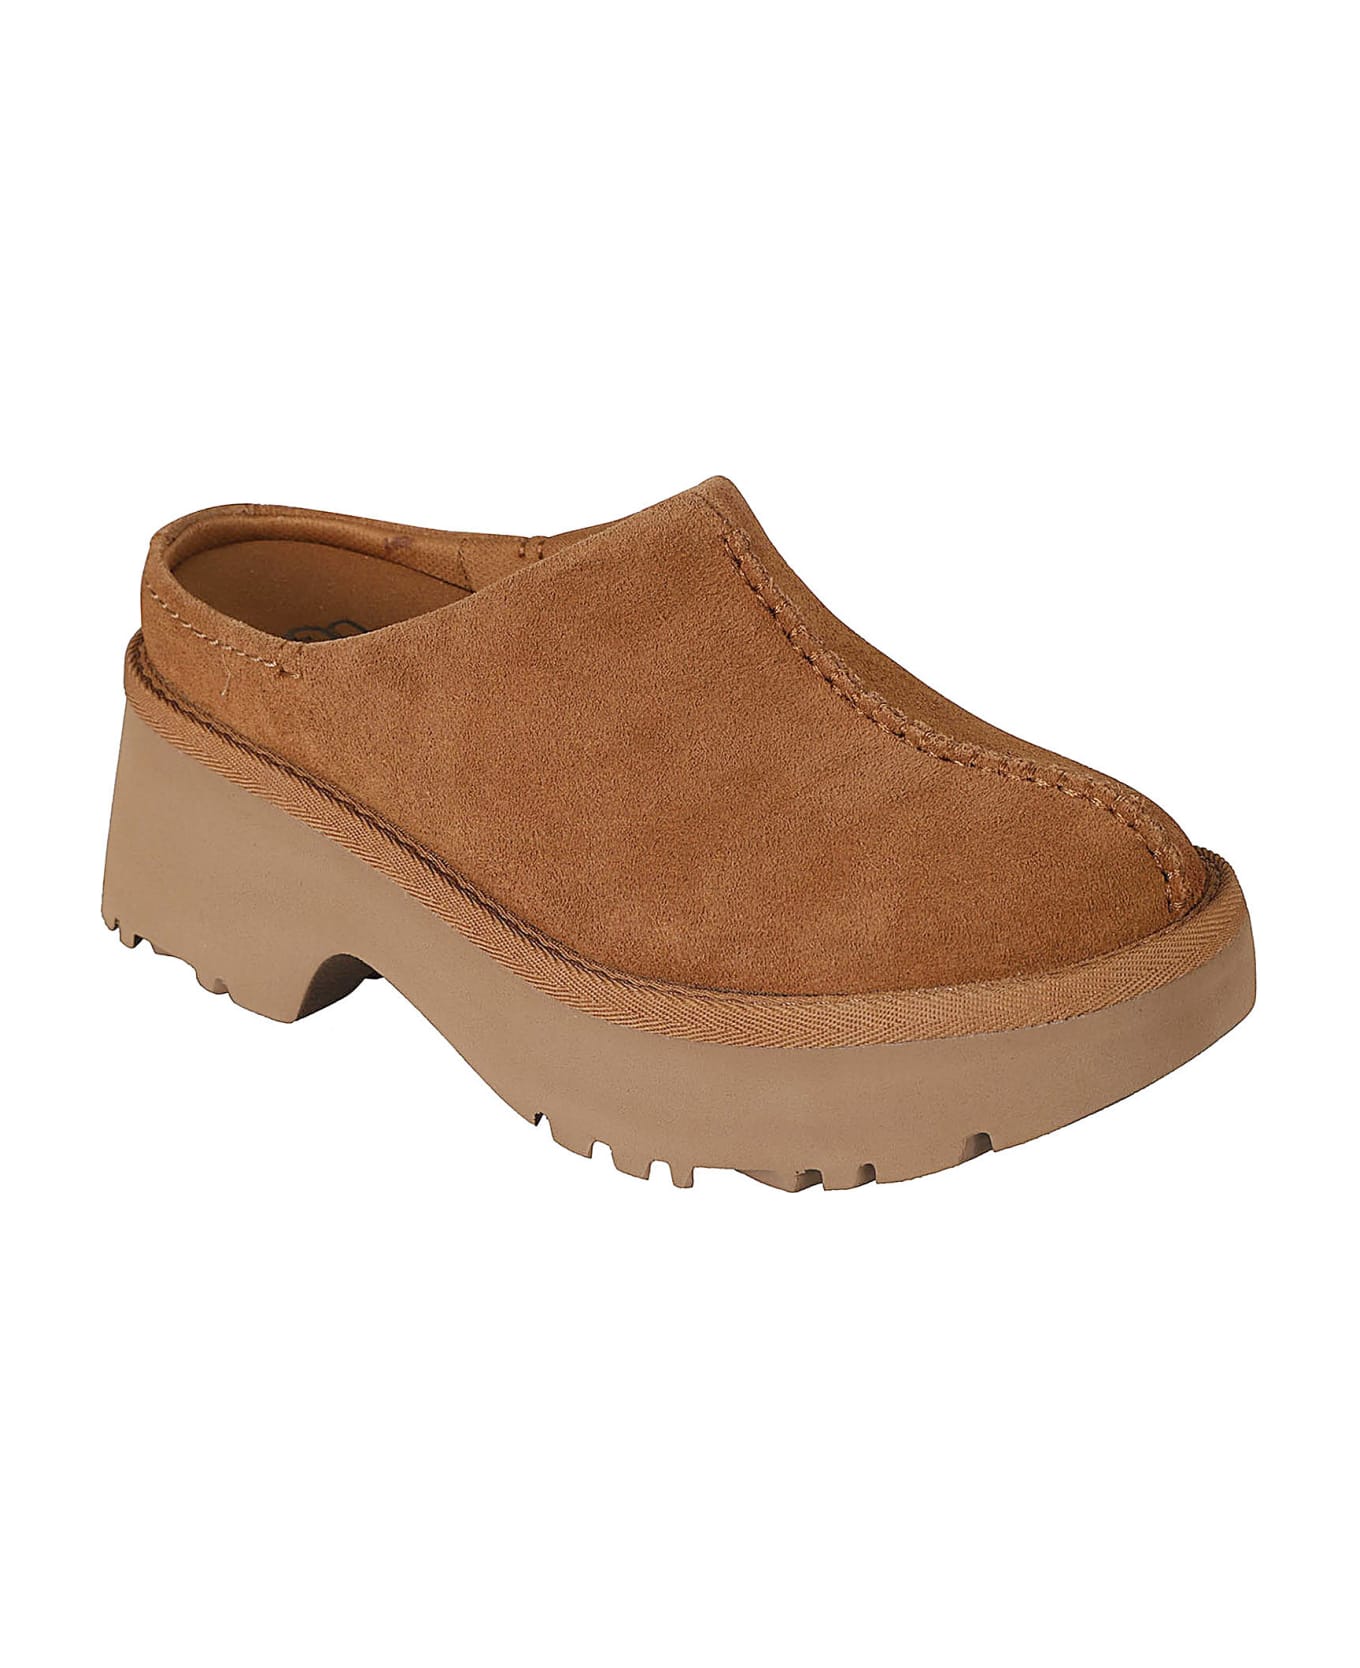 UGG New Heights Clogs - CHESTNUT サンダル